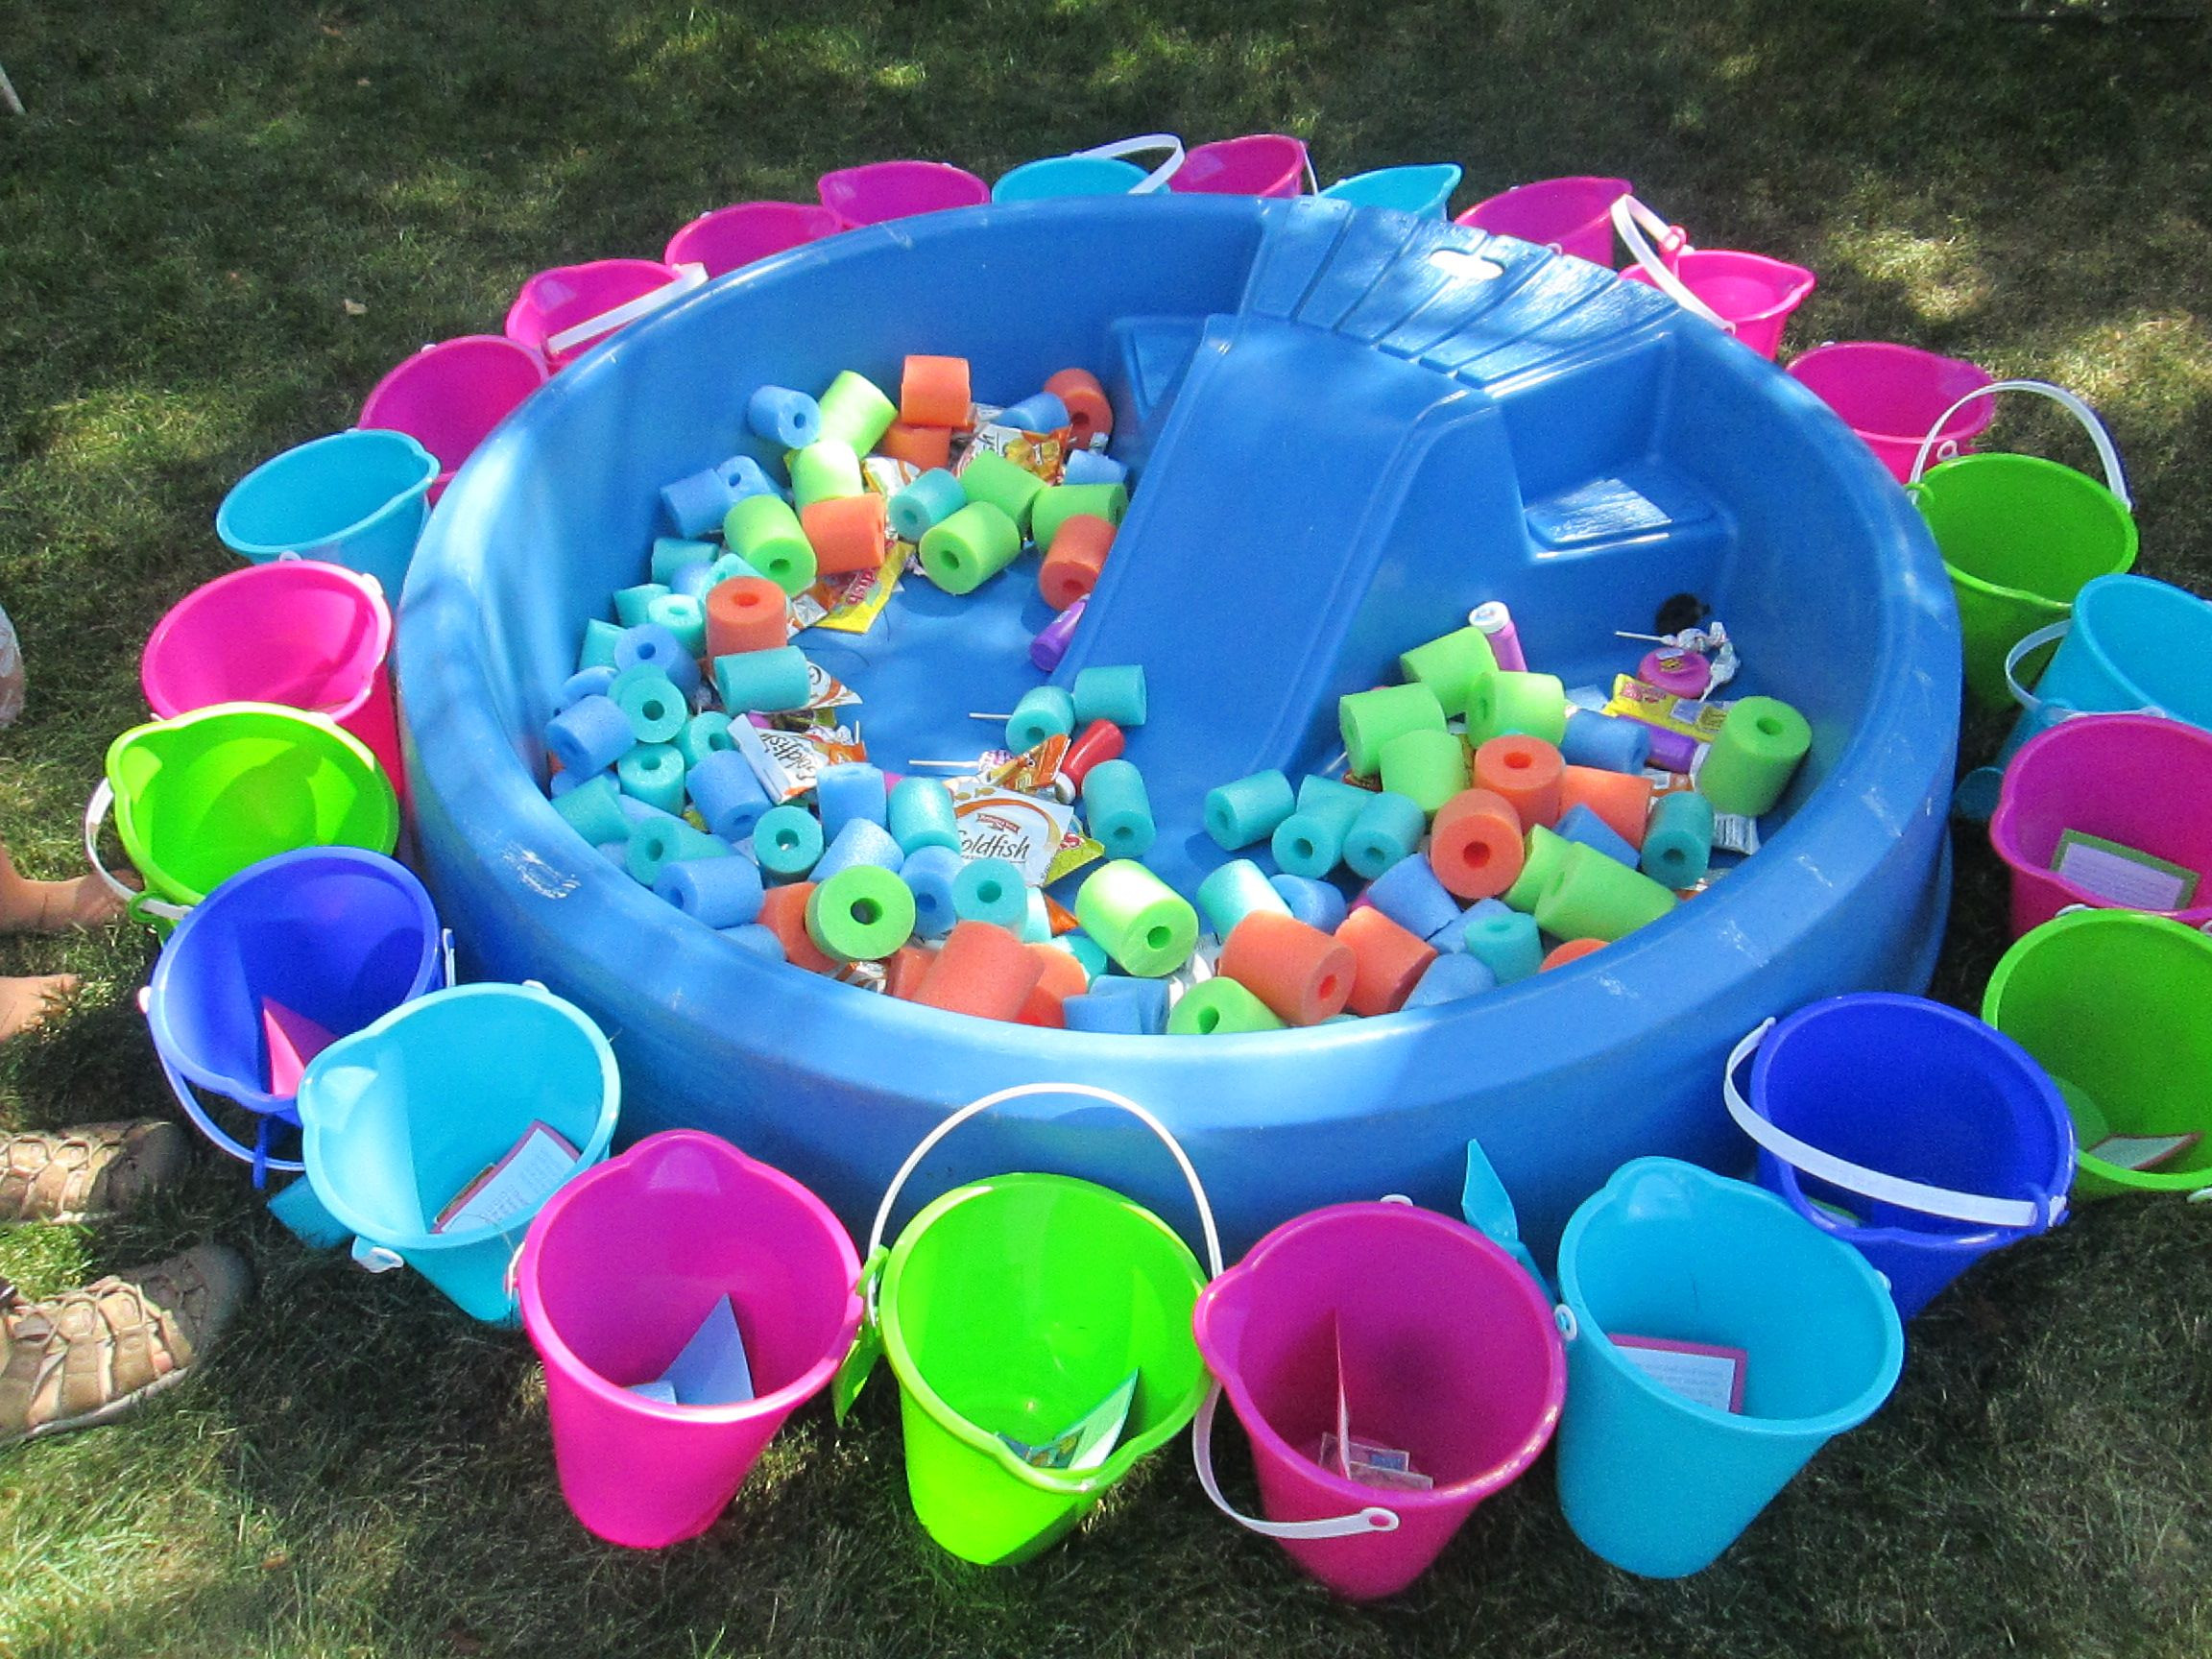 Baby Pool Party Ideas
 Fill a baby pool with cut up pool noodles and goody bag